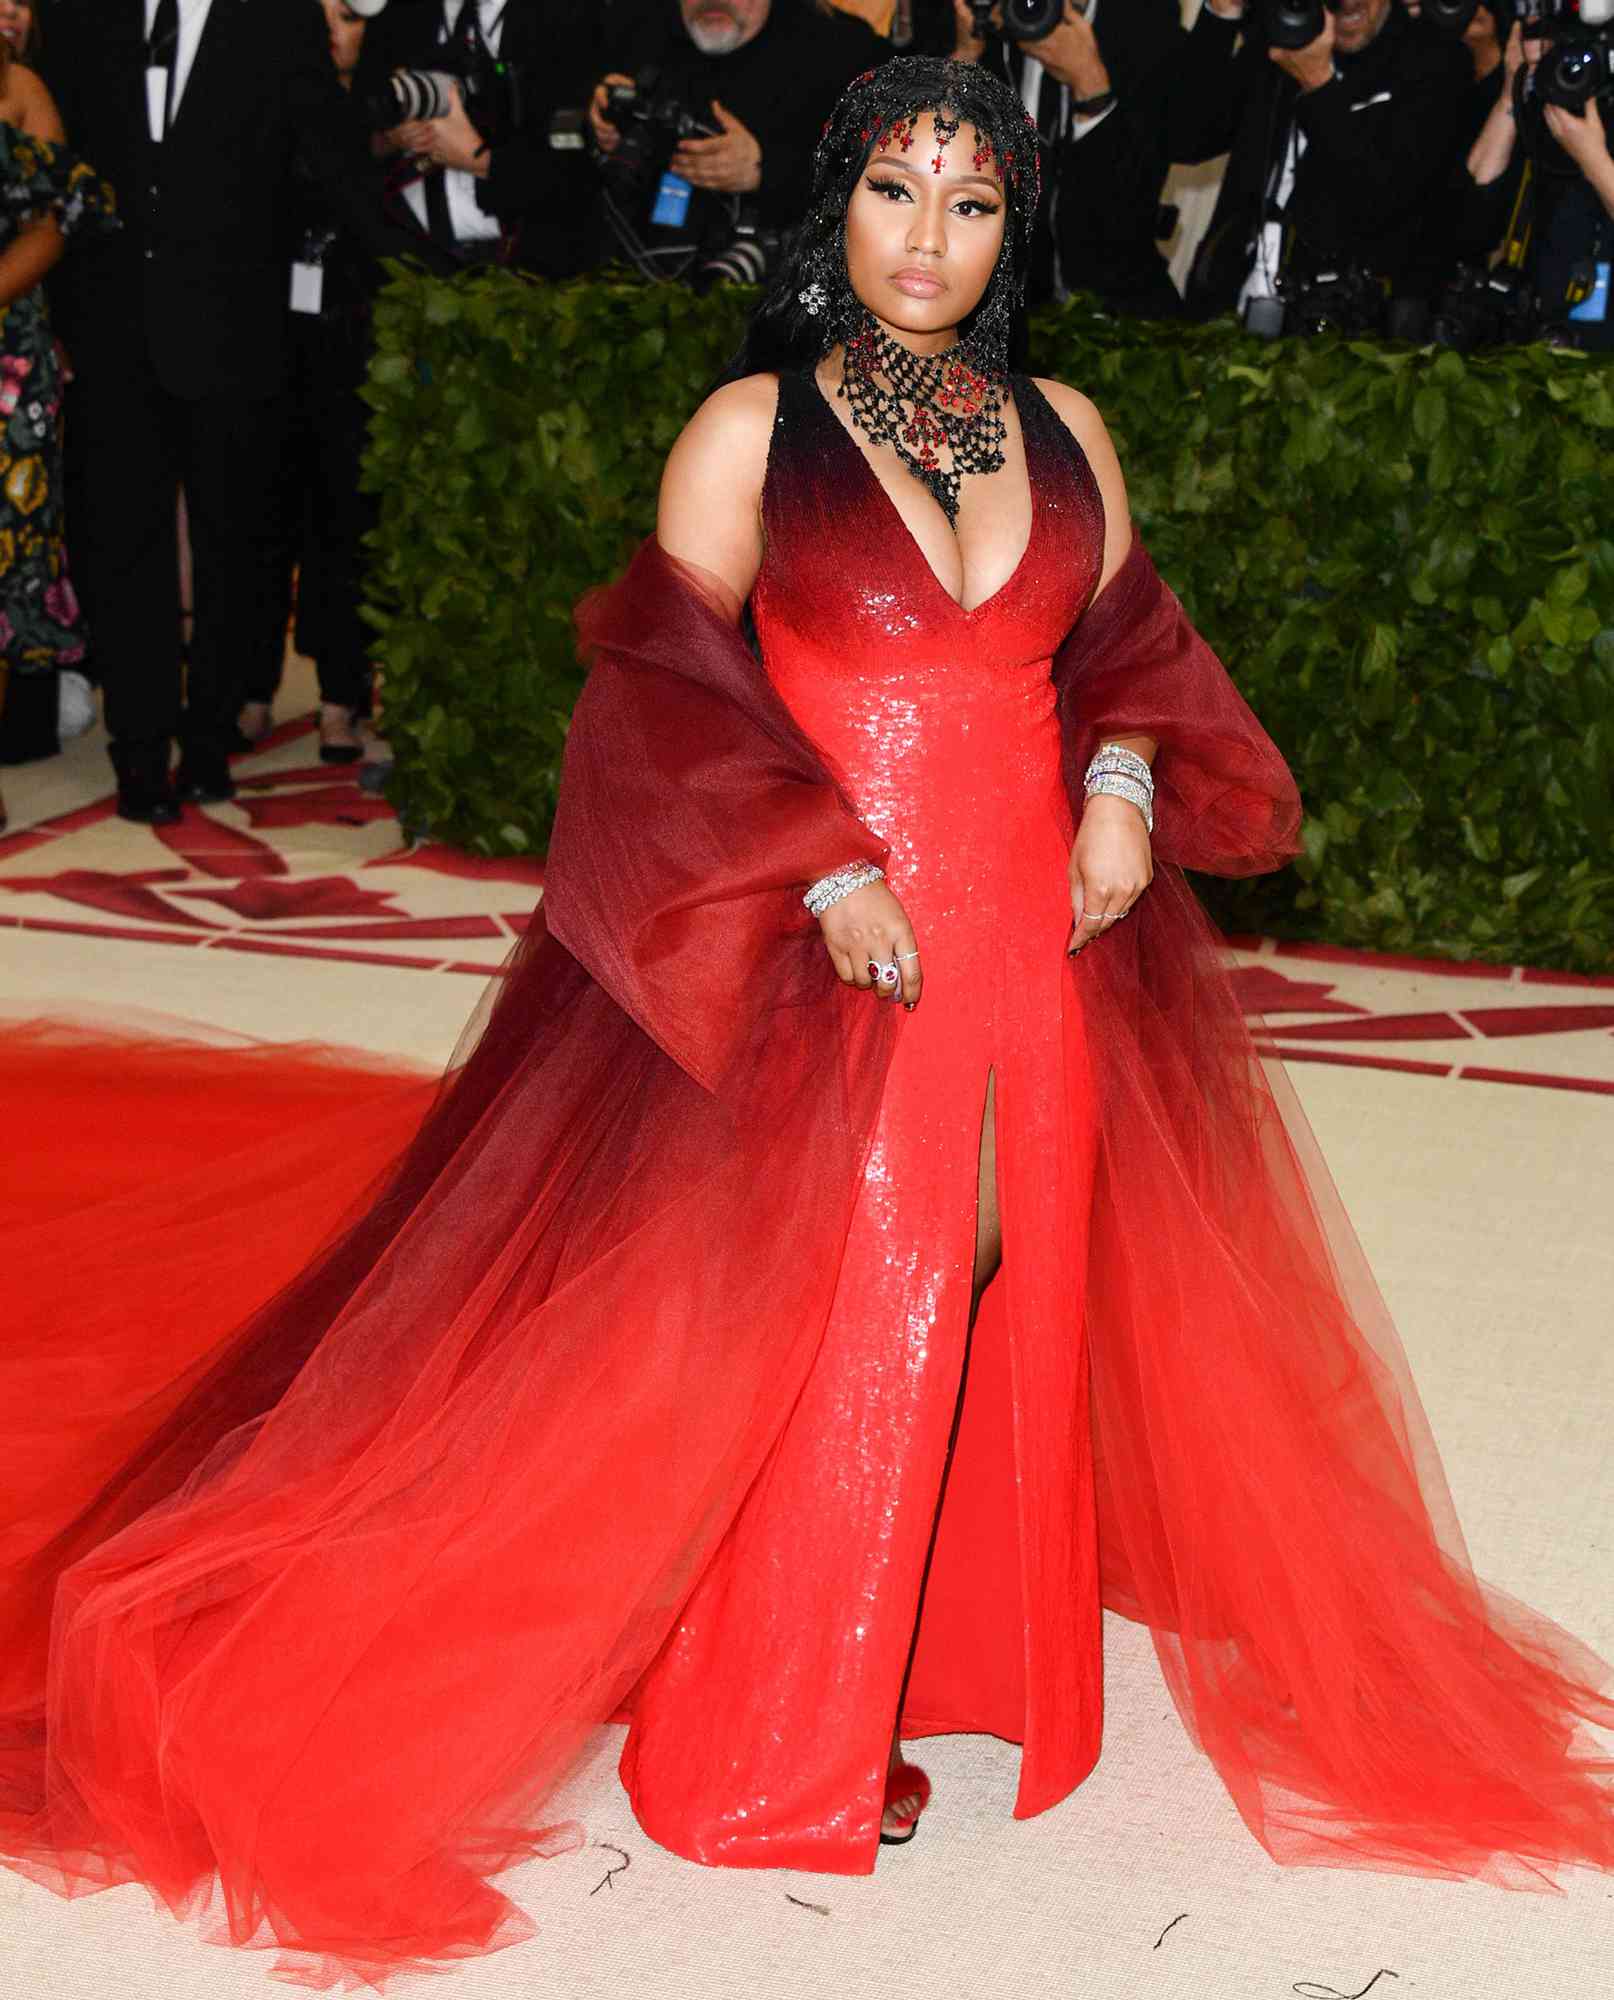 Nicki Minaj attends the Heavenly Bodies: Fashion & The Catholic Imagination Costume Institute Gala at the Metropolitan Museum of Art on May 7, 2018 in New York City